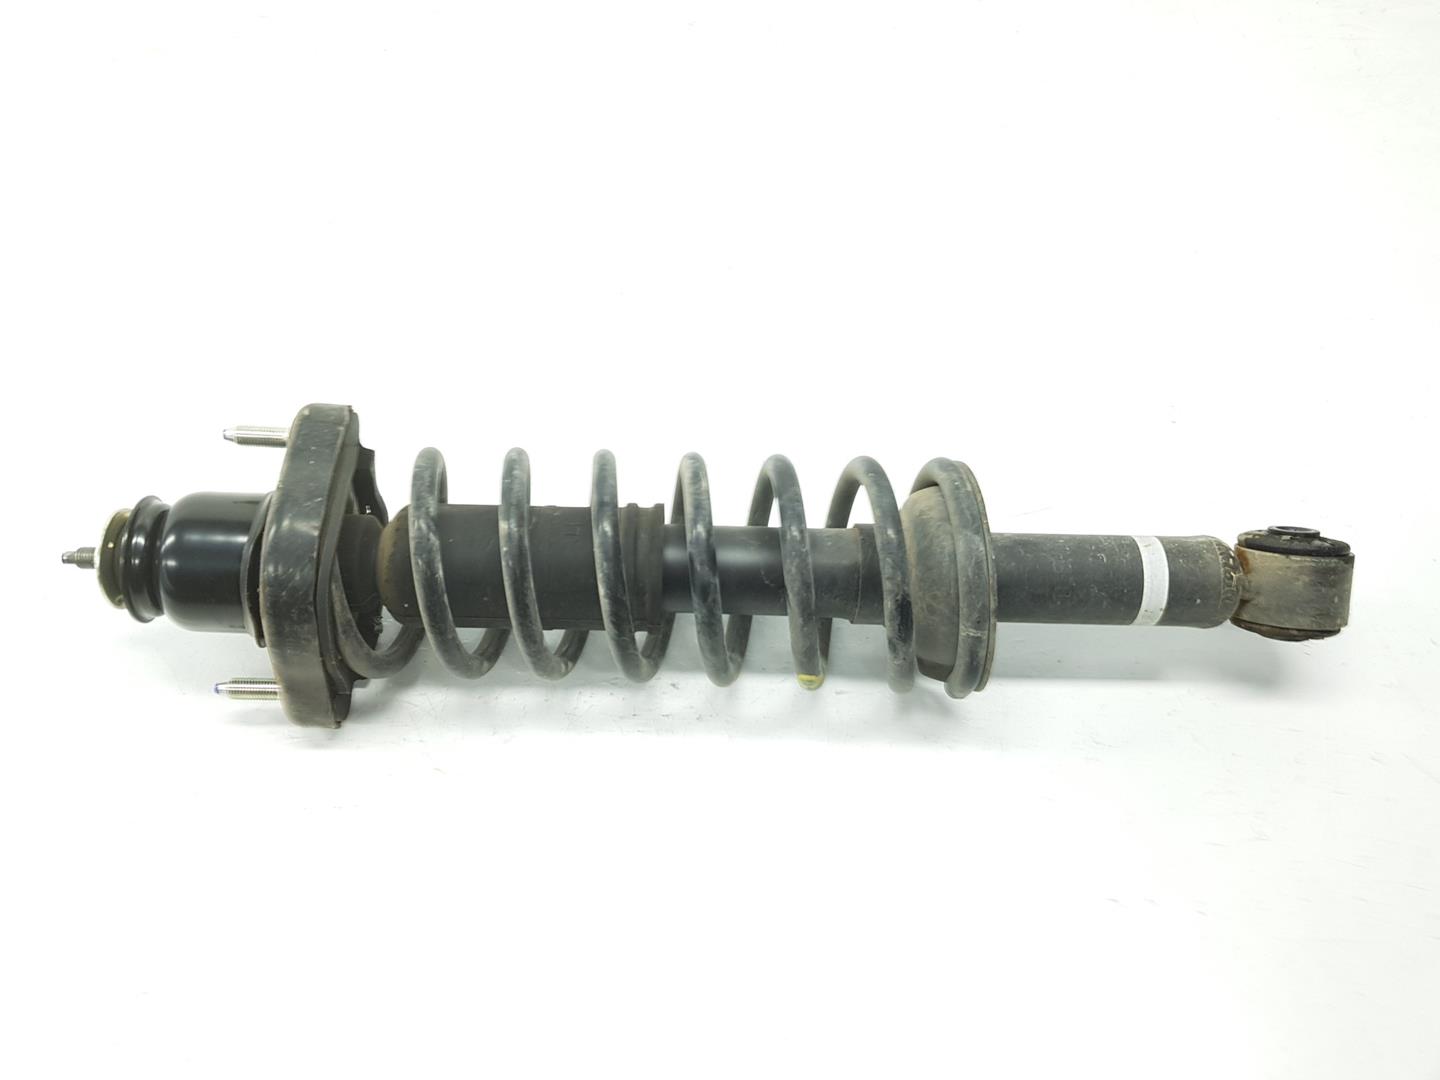 MITSUBISHI ASX 1 generation (2010-2020) Rear Left Shock Absorber 4162A401, 4162A401 19636268